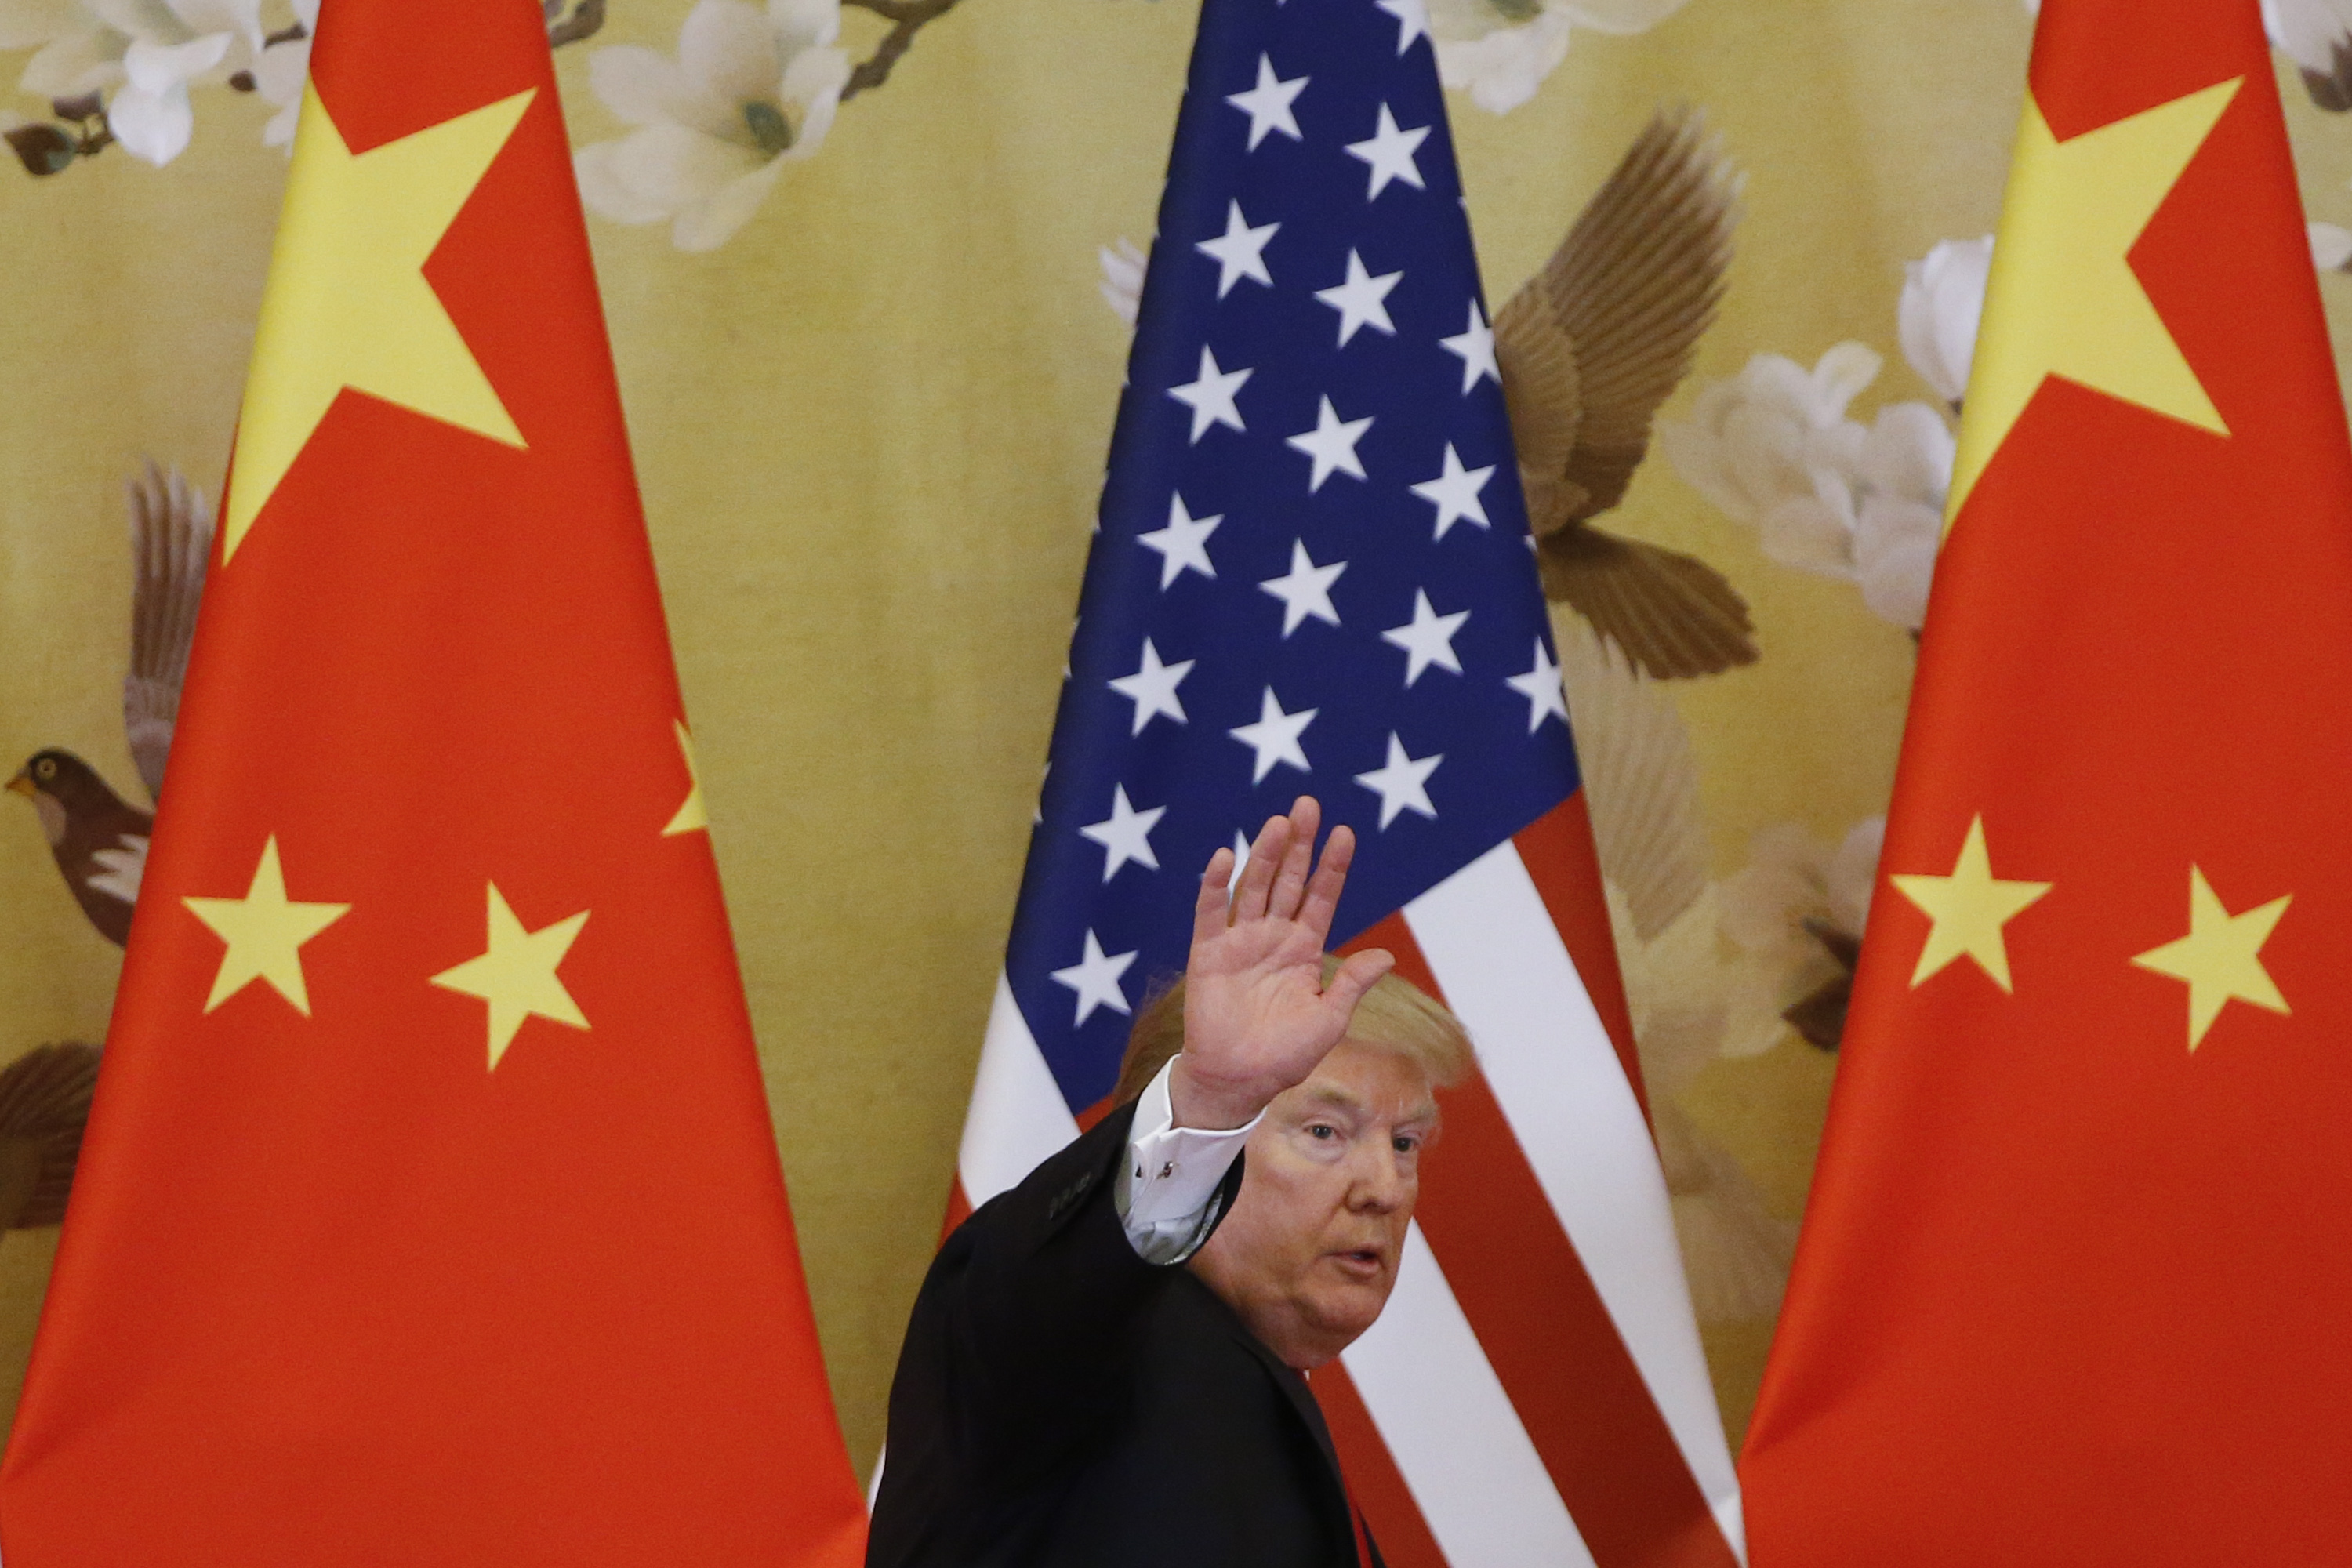 President Trump walks away from a red Chinese flag and toward an American flag while waving goodbye